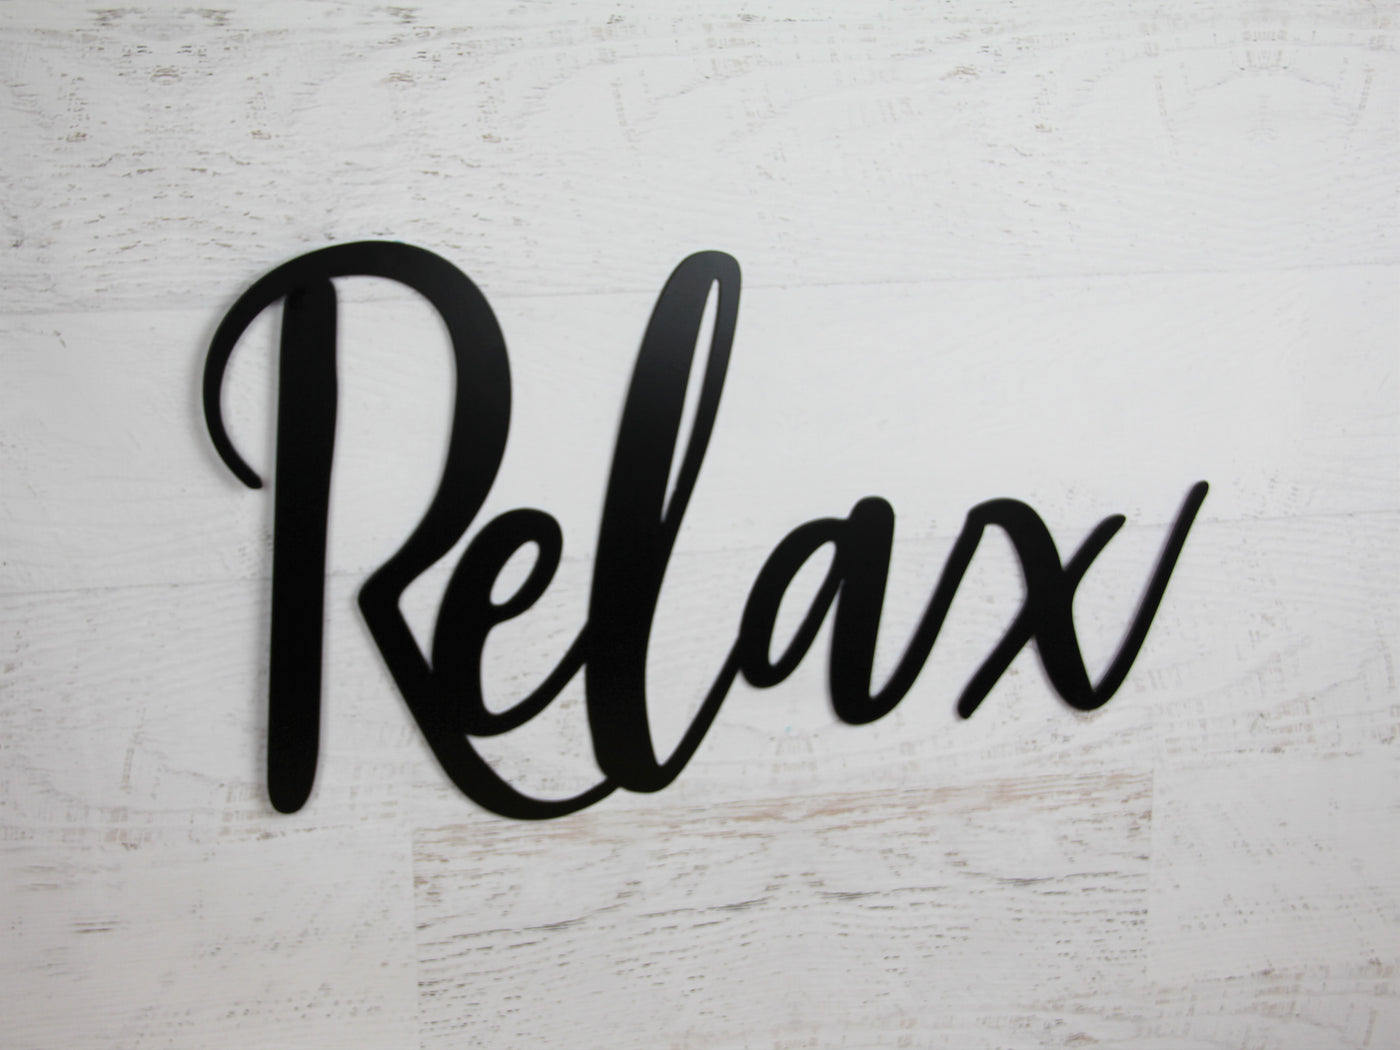 Relax Metal Word Sign - Madison Iron and Wood - Wall Art - metal outdoor decor - Steel deocrations - american made products - veteran owned business products - fencing decorations - fencing supplies - custom wall decorations - personalized wall signs - steel - decorative post caps - steel post caps - metal post caps - brackets - structural brackets - home improvement - easter - easter decorations - easter gift - easter yard decor